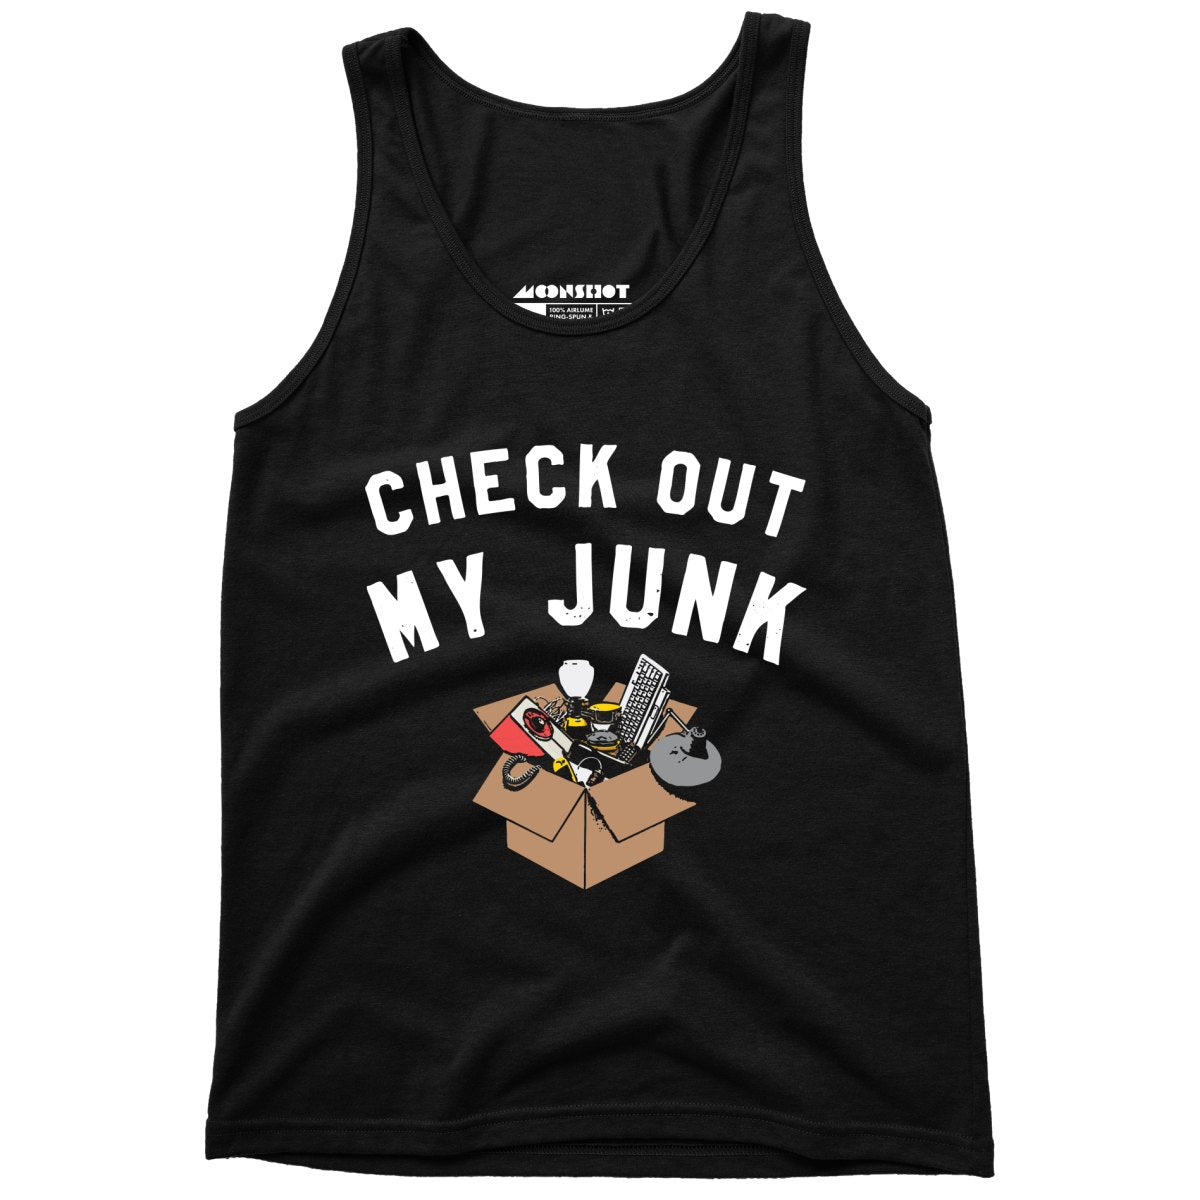 Check Out My Junk - Unisex Tank Top